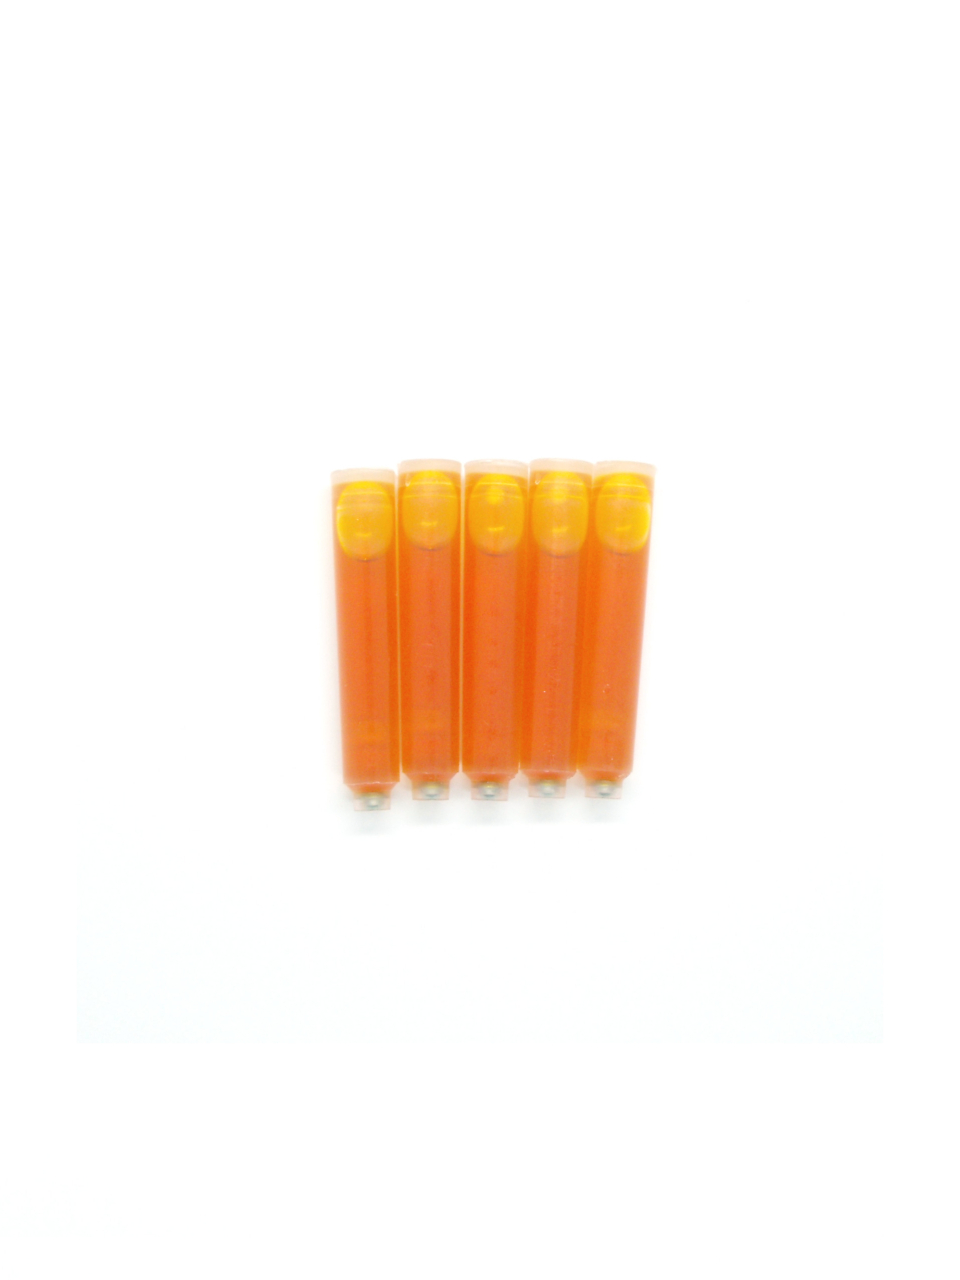 PenConverter Ink Cartridges For Conklin Fountain Pens (Yellow)